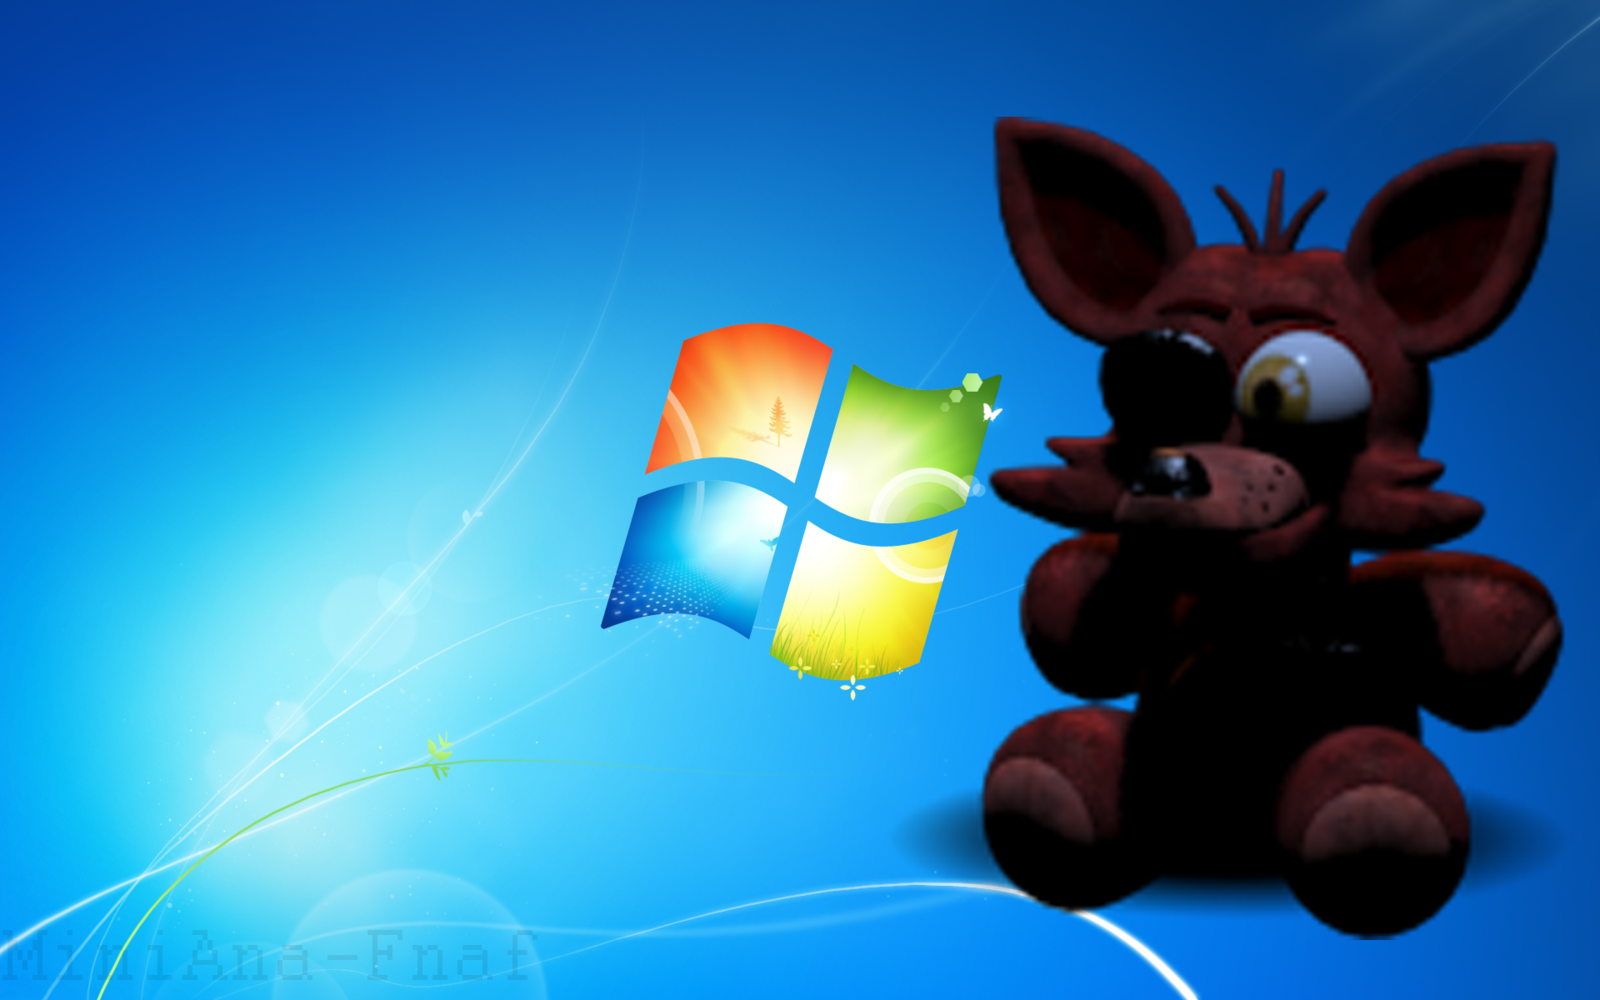 Plushie Wallpaper. Plushie Wallpaper, Plushie Foxy Background and Cute Plushie Wallpaper